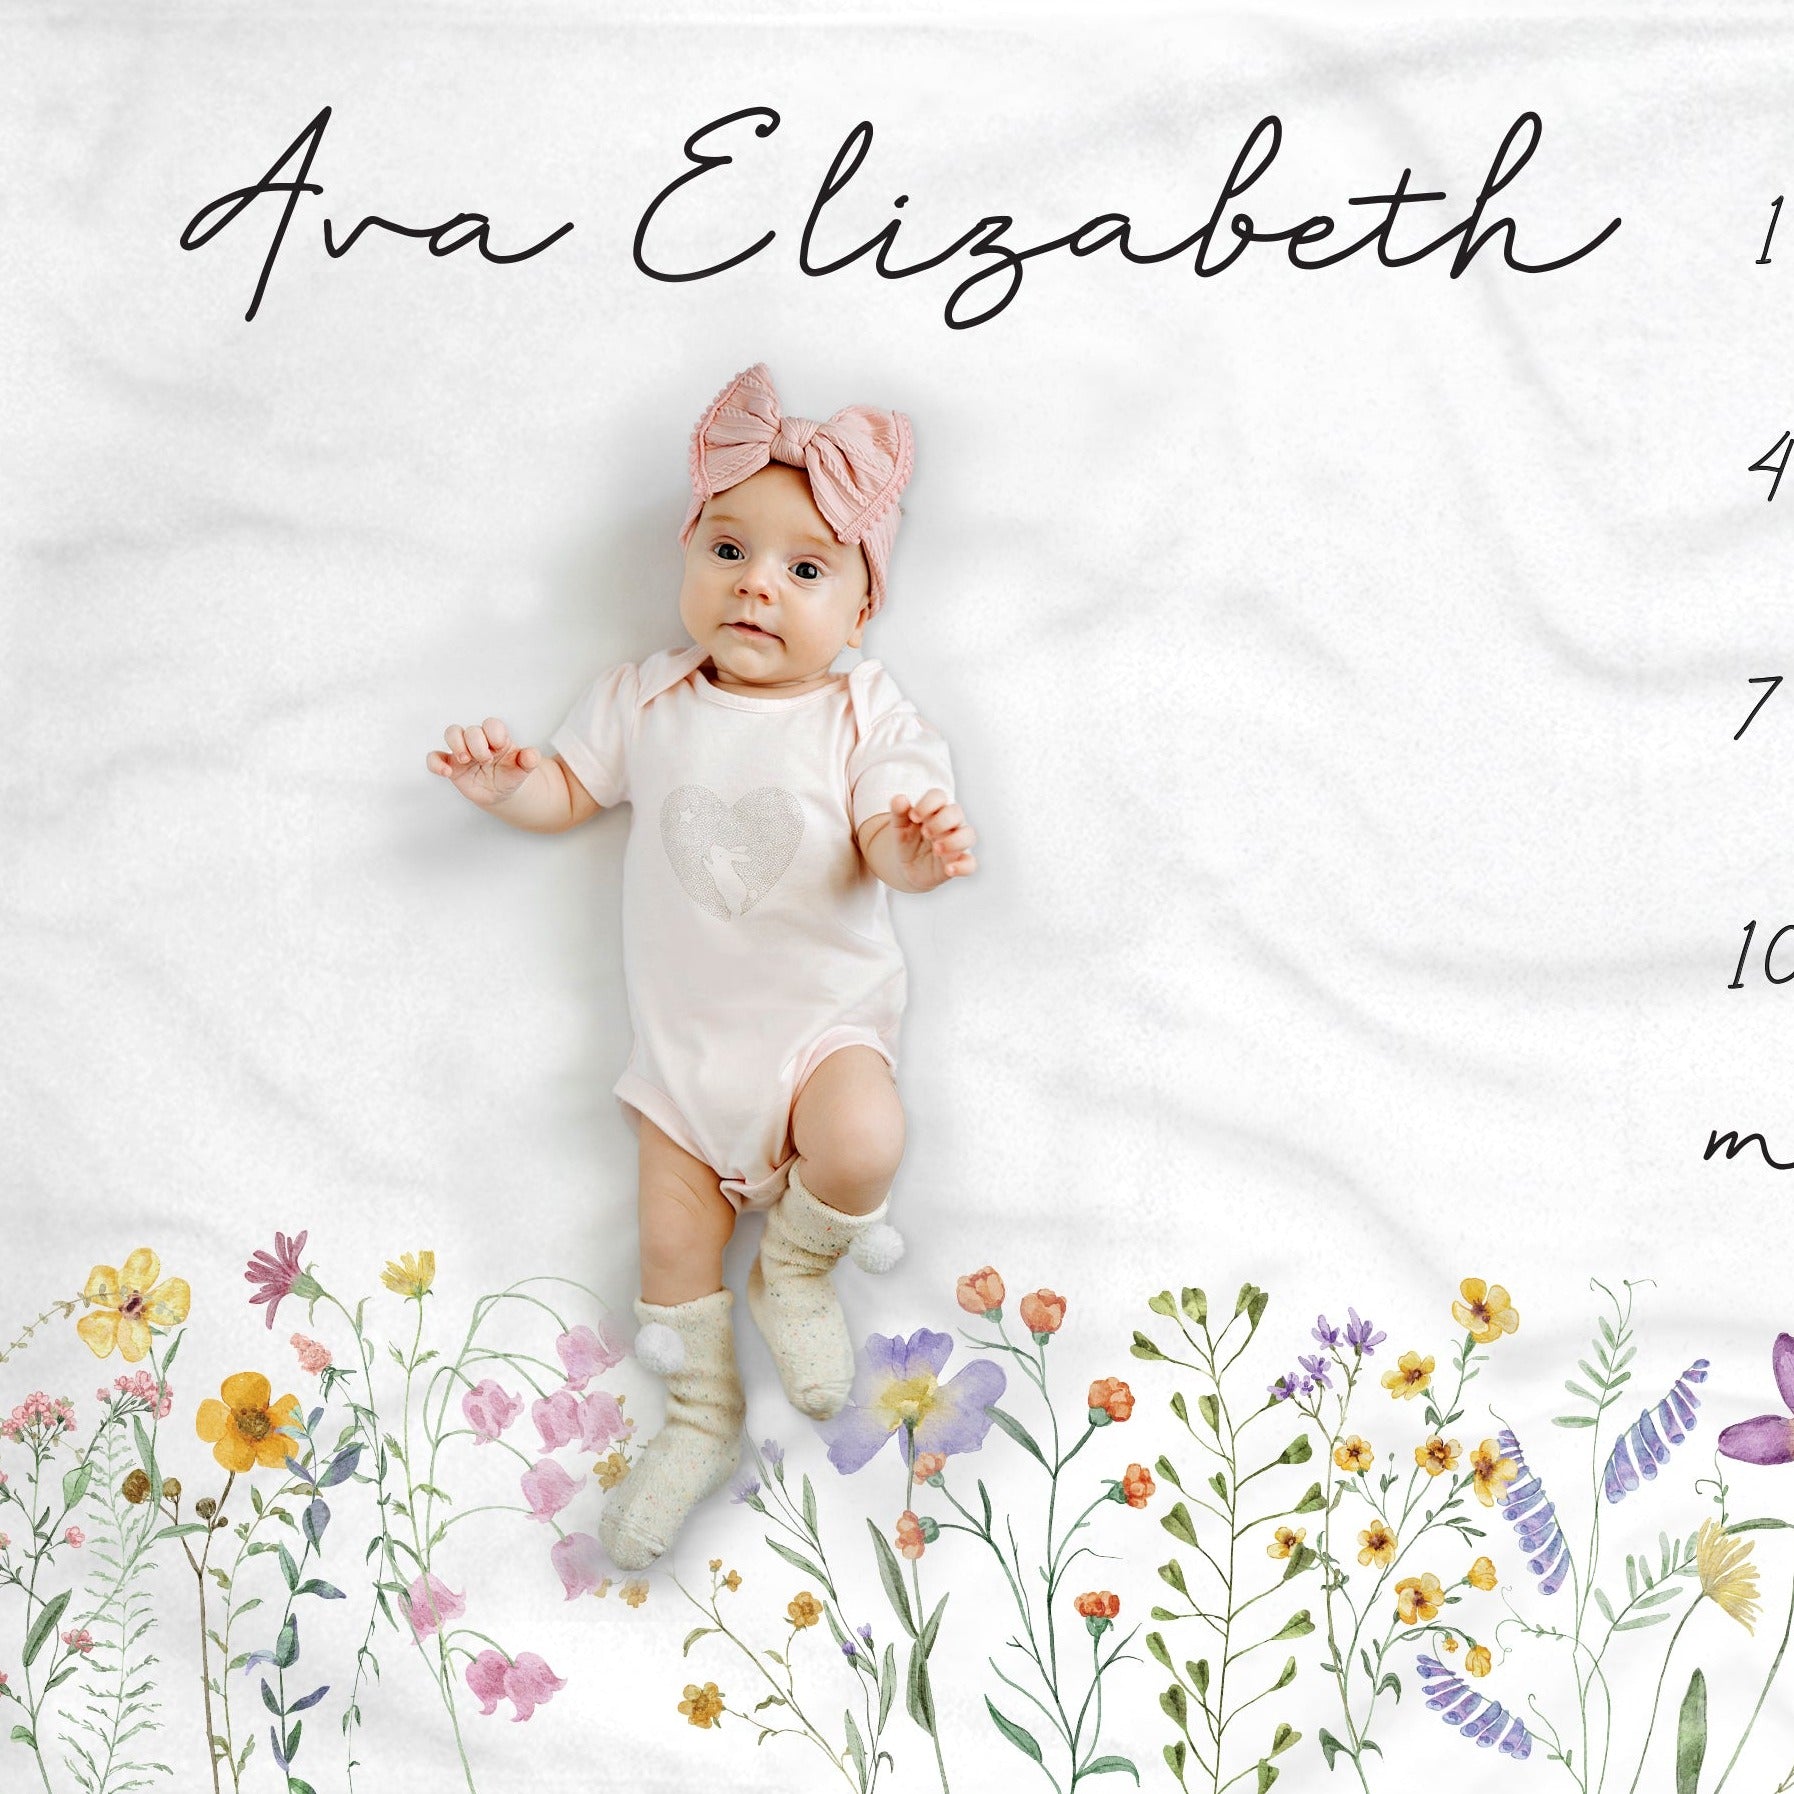 Wildflower Milestone Blanket for a baby girl, vintage style, bohemian floral, personalized, soft fleece